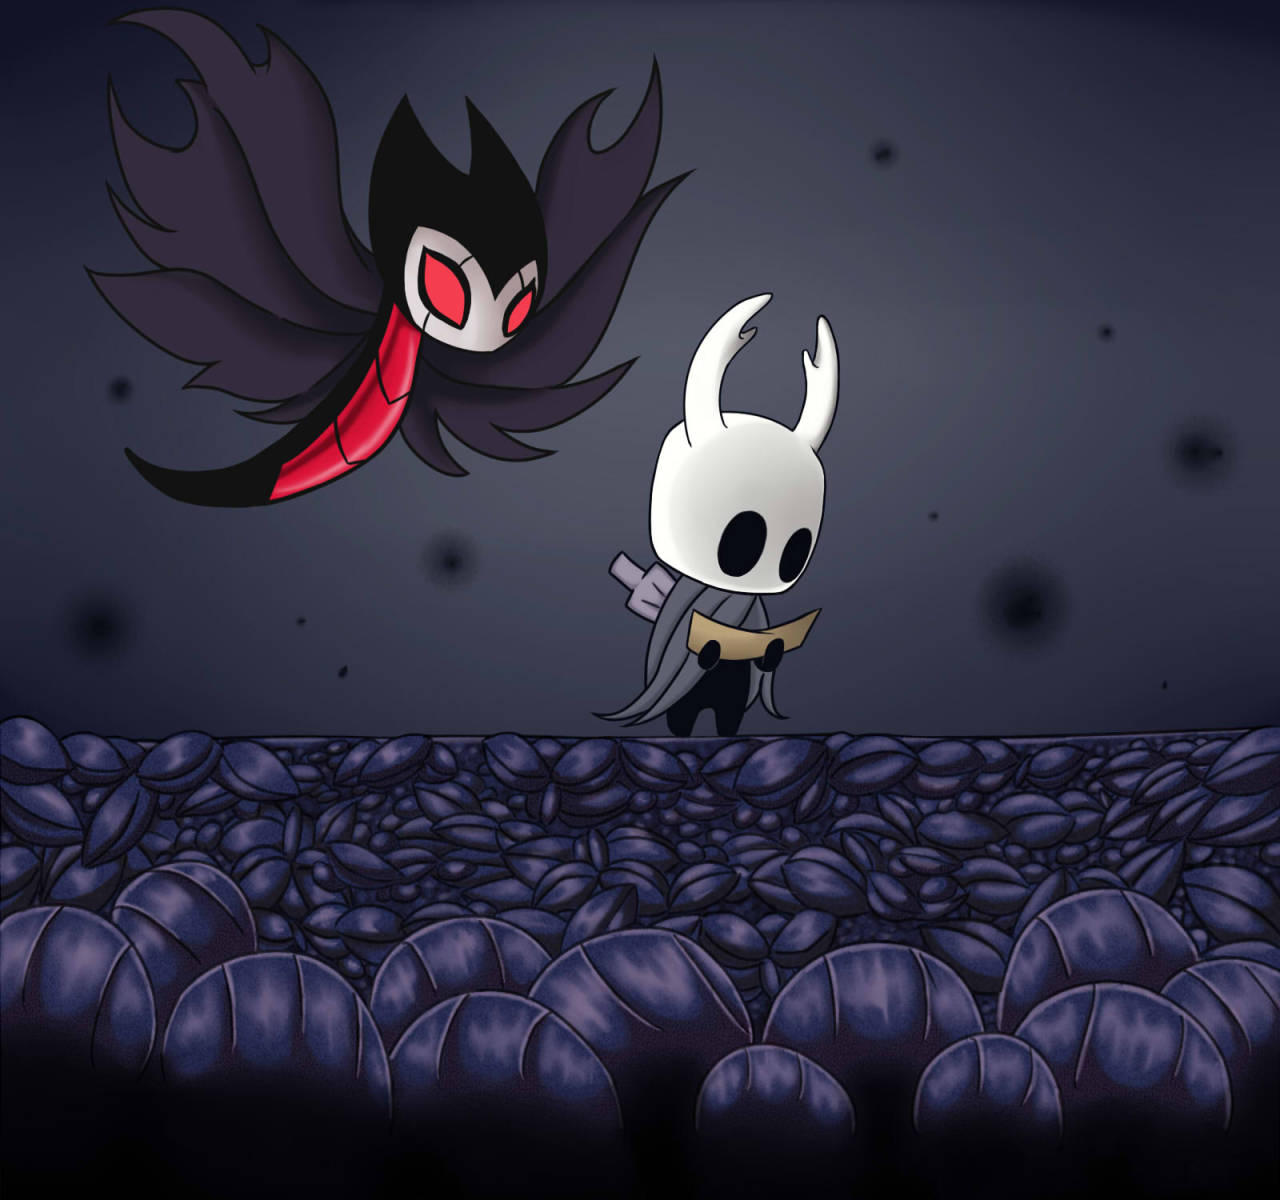 hollow knight map with everything